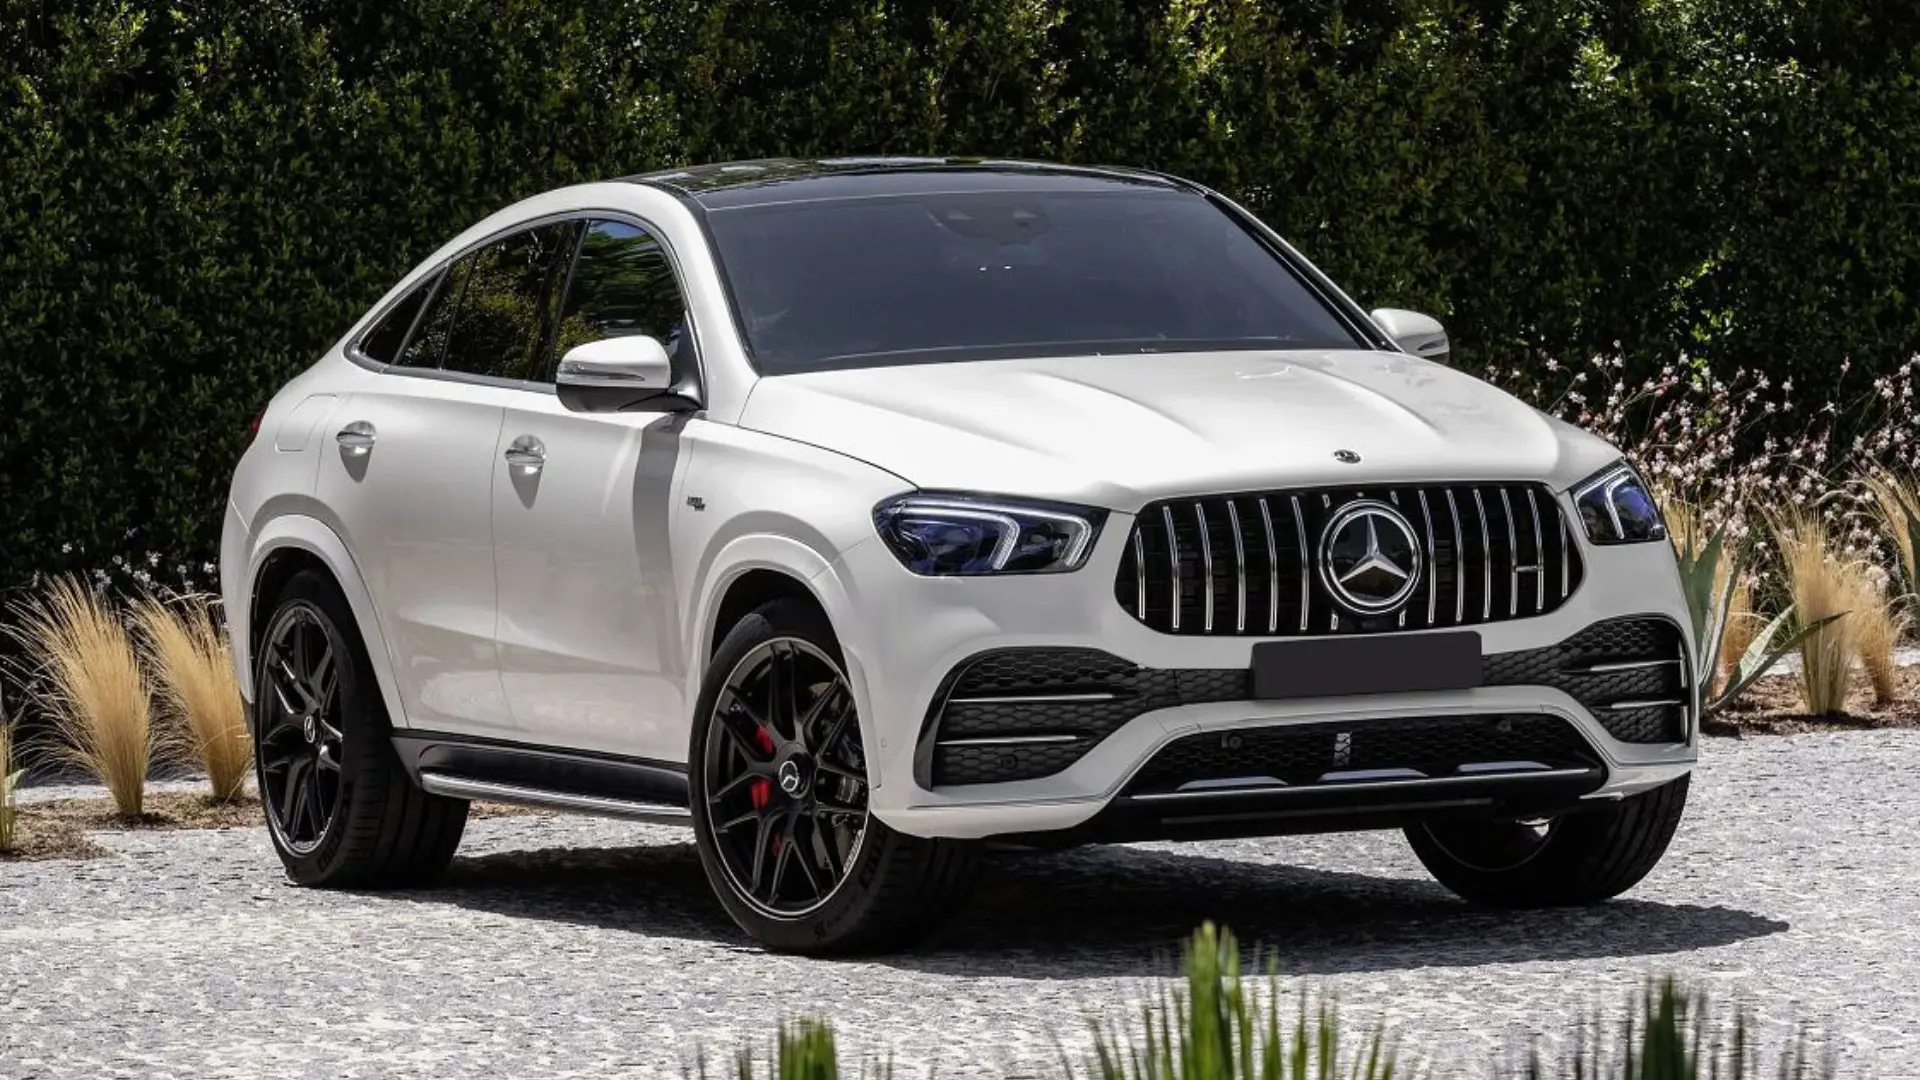 A white mercedes gle coupe parked in front of some bushes.